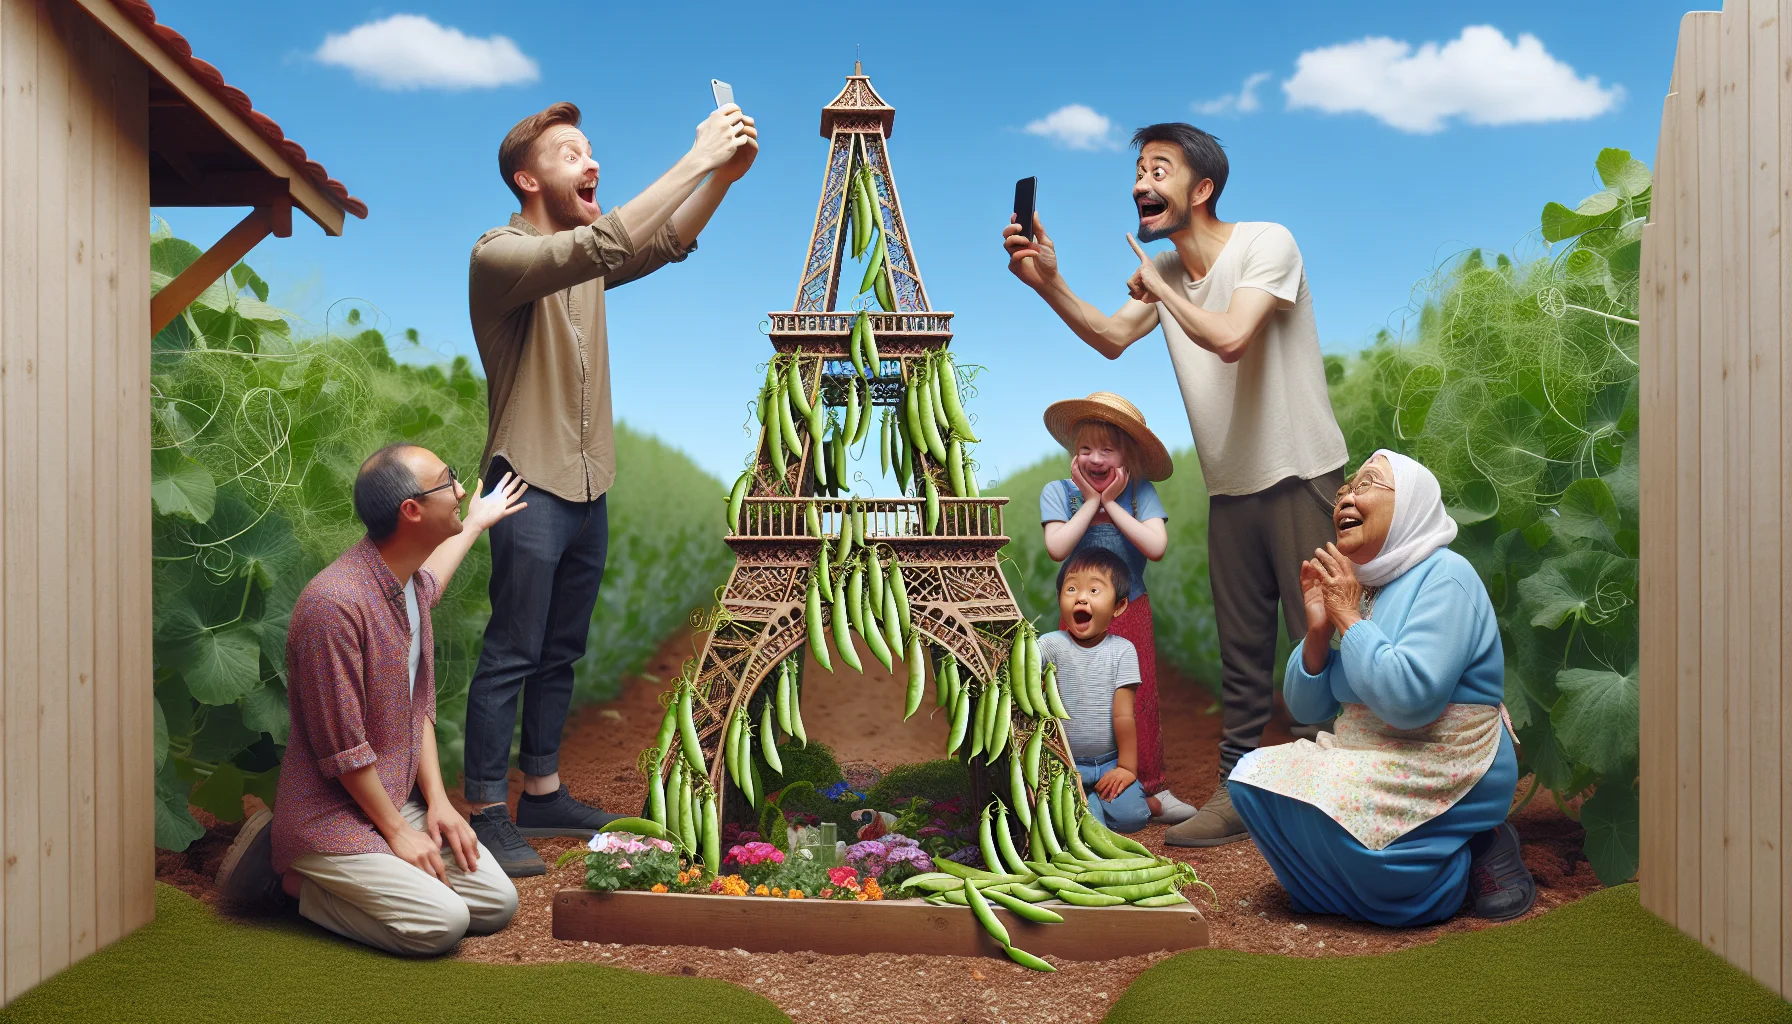 Create a humorous and realistic scene centered around a snap pea trellis in a garden. Imagine the trellis is fashioned to resemble a famous tourist attraction like the Eiffel Tower, with ripe snap peas cascading down its structure, catching the attention of a diverse range of people who are passing by. A Caucasian male is attempting to capture a selfie, while a South Asian female is cheerfully picking some peas. A Middle-Eastern child is wide-eyed, marvelling at the structure, and a Hispanic elderly woman is lovingly tending it. Let this lighthearted scene encourage the joy of gardening.